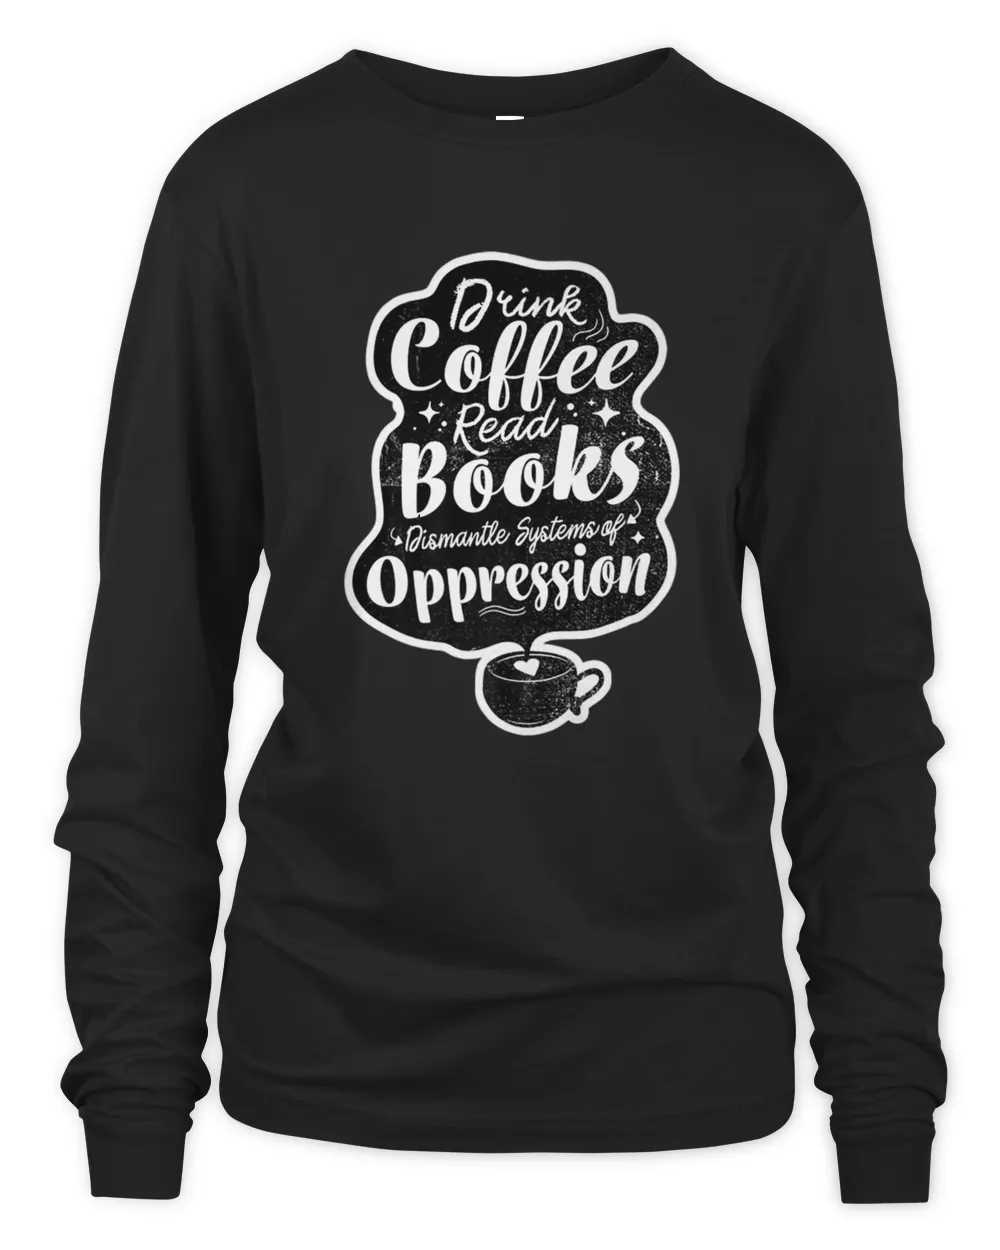 Drink Coffee Read Books Dismantle Systems Of Oppression Art Premium T-shirt